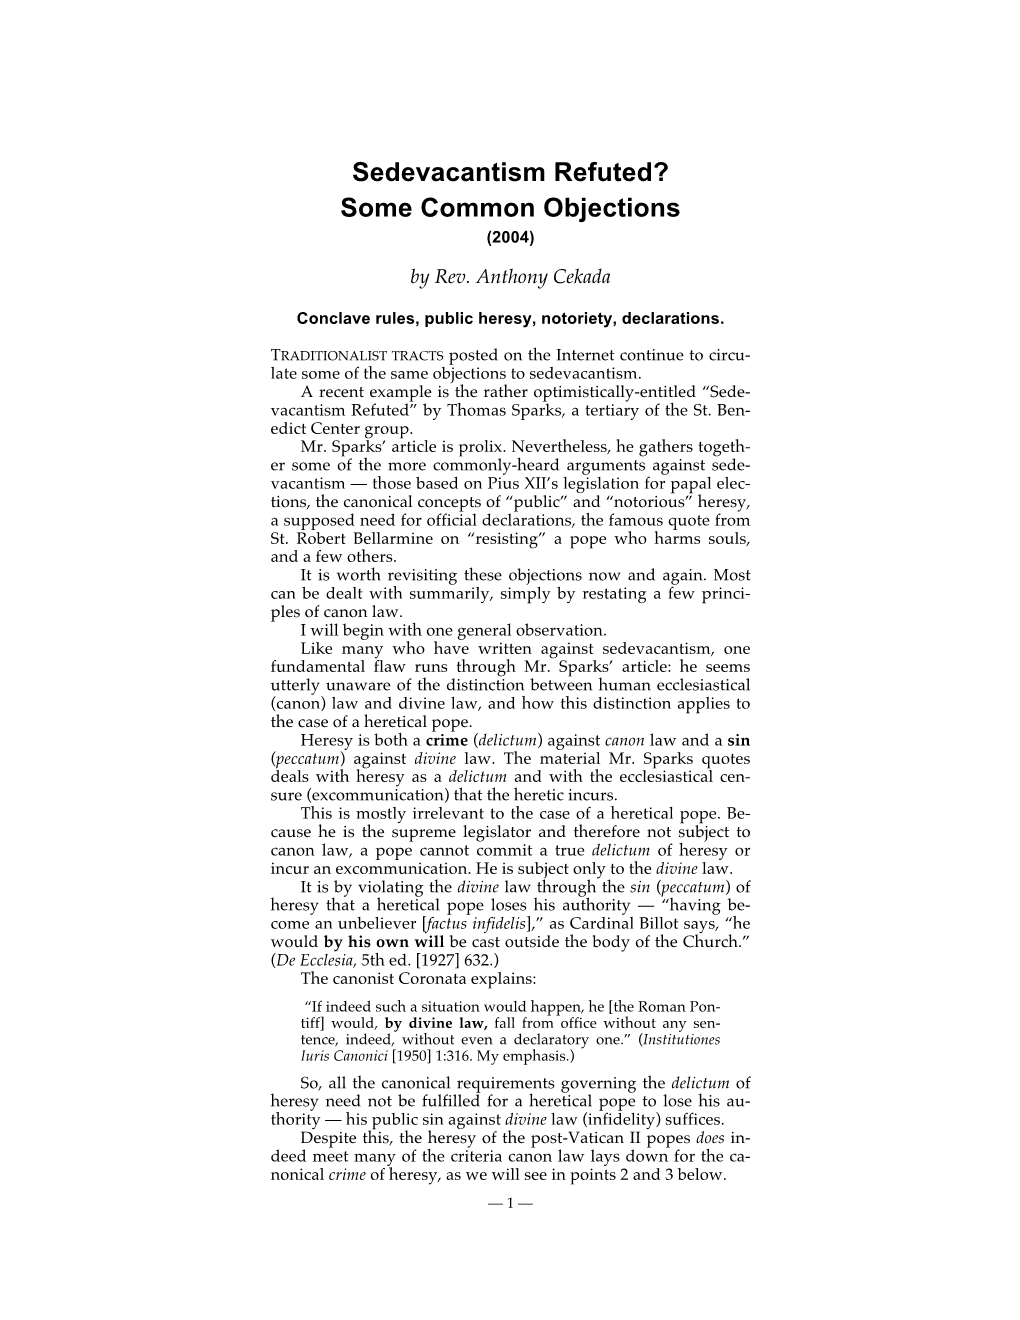 Sedevacantism Refuted? Some Common Objections (2004)